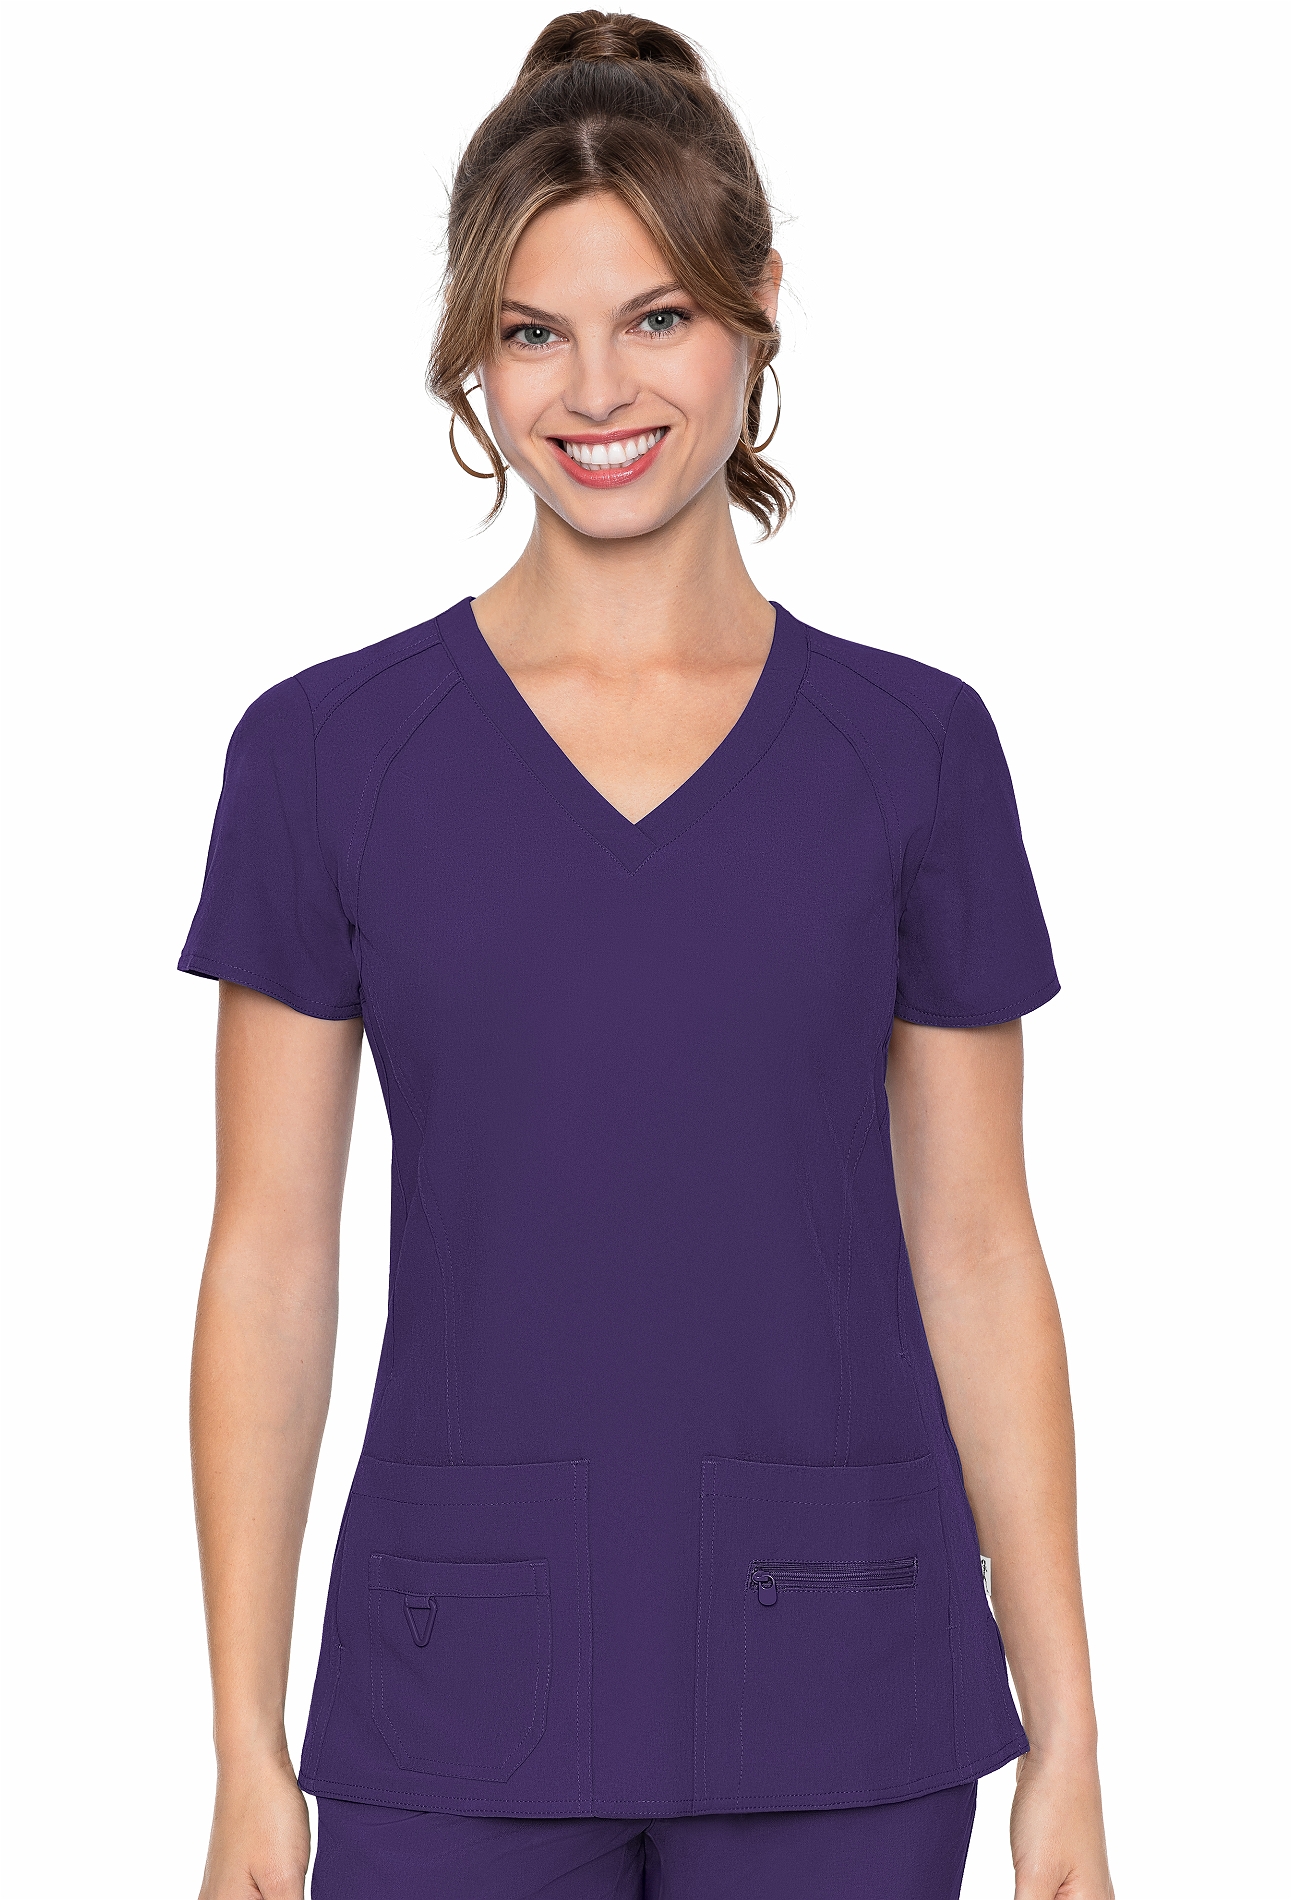 Med Couture Activate Refined Sport Knit Women's V-Neck Scrub Top-MC8416 (Plum - XX-Large)